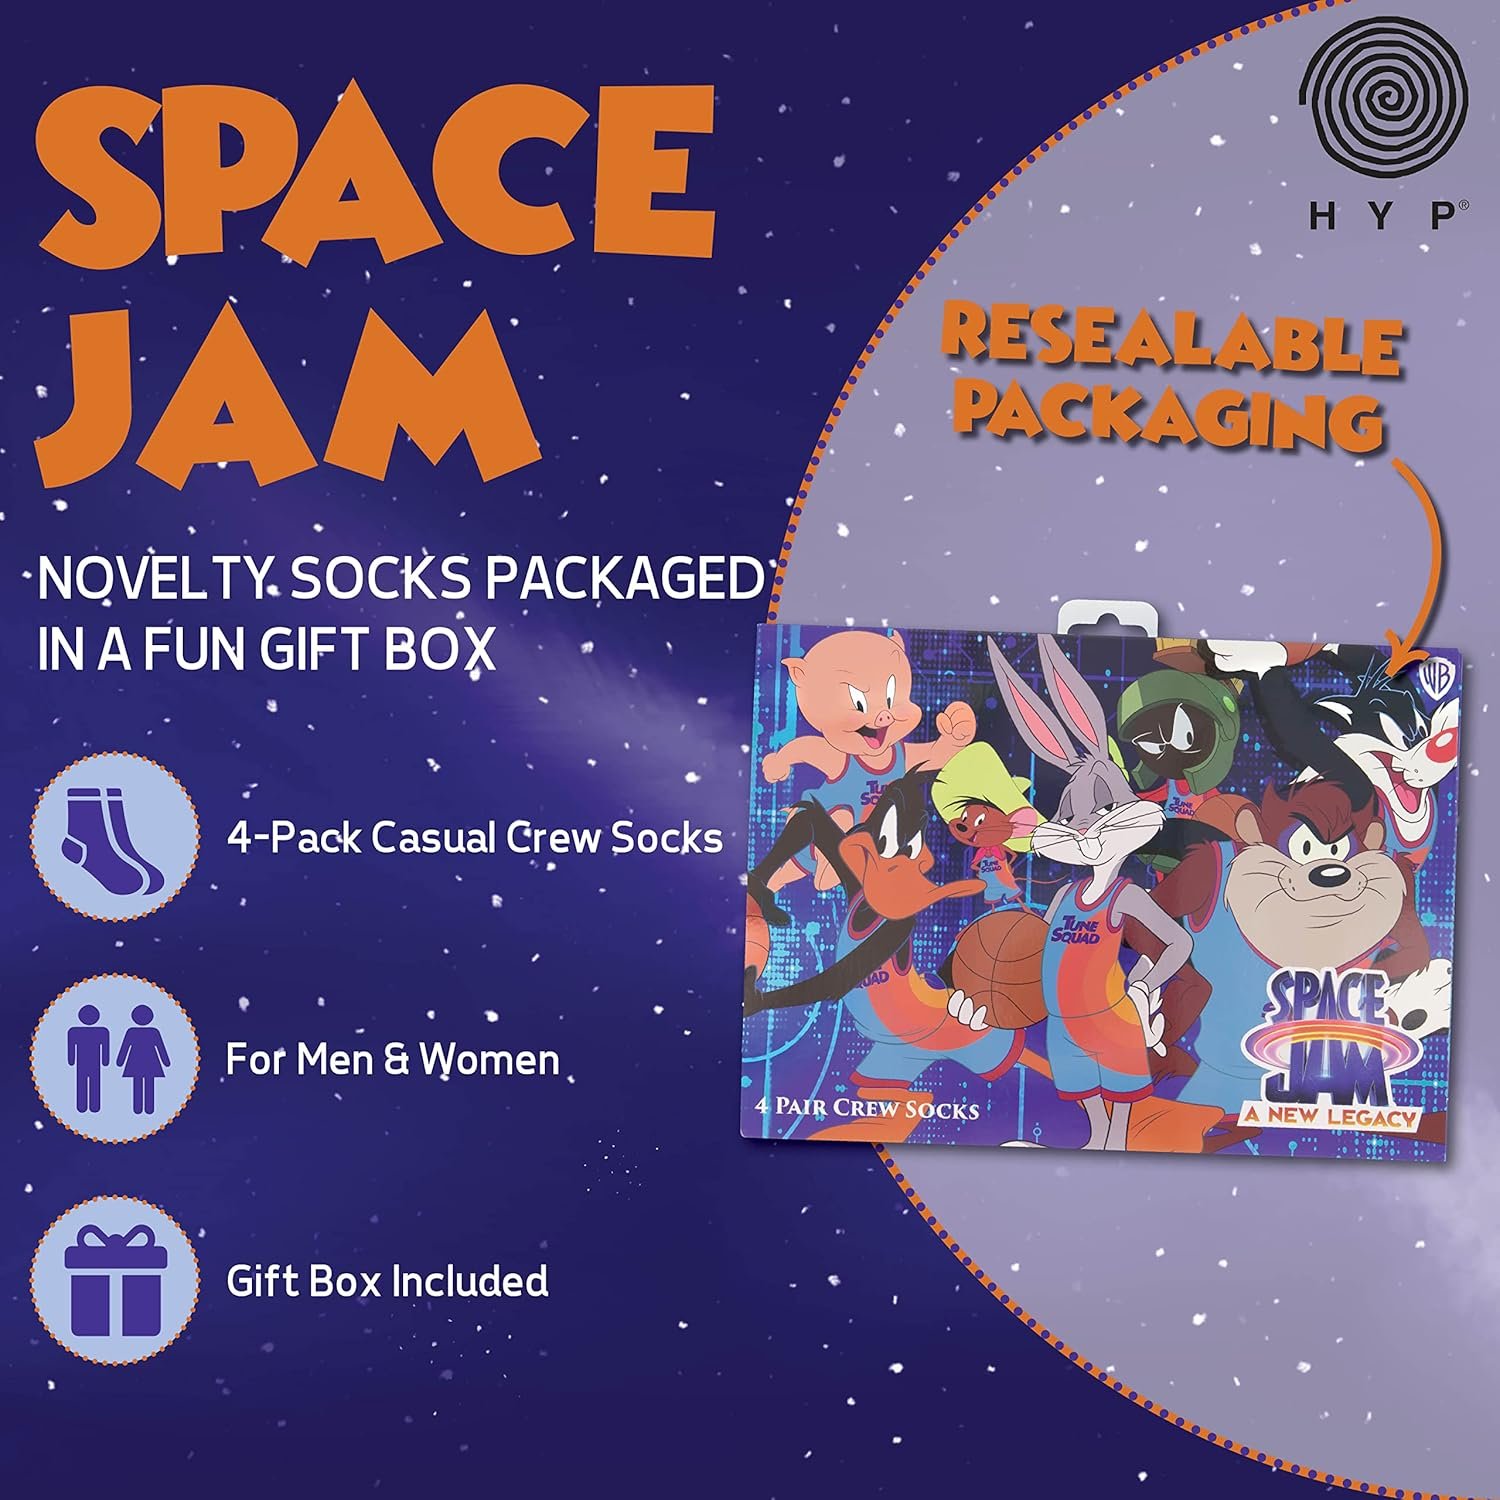 Hyp Space Jam Socks Mens and Womens Socks Review